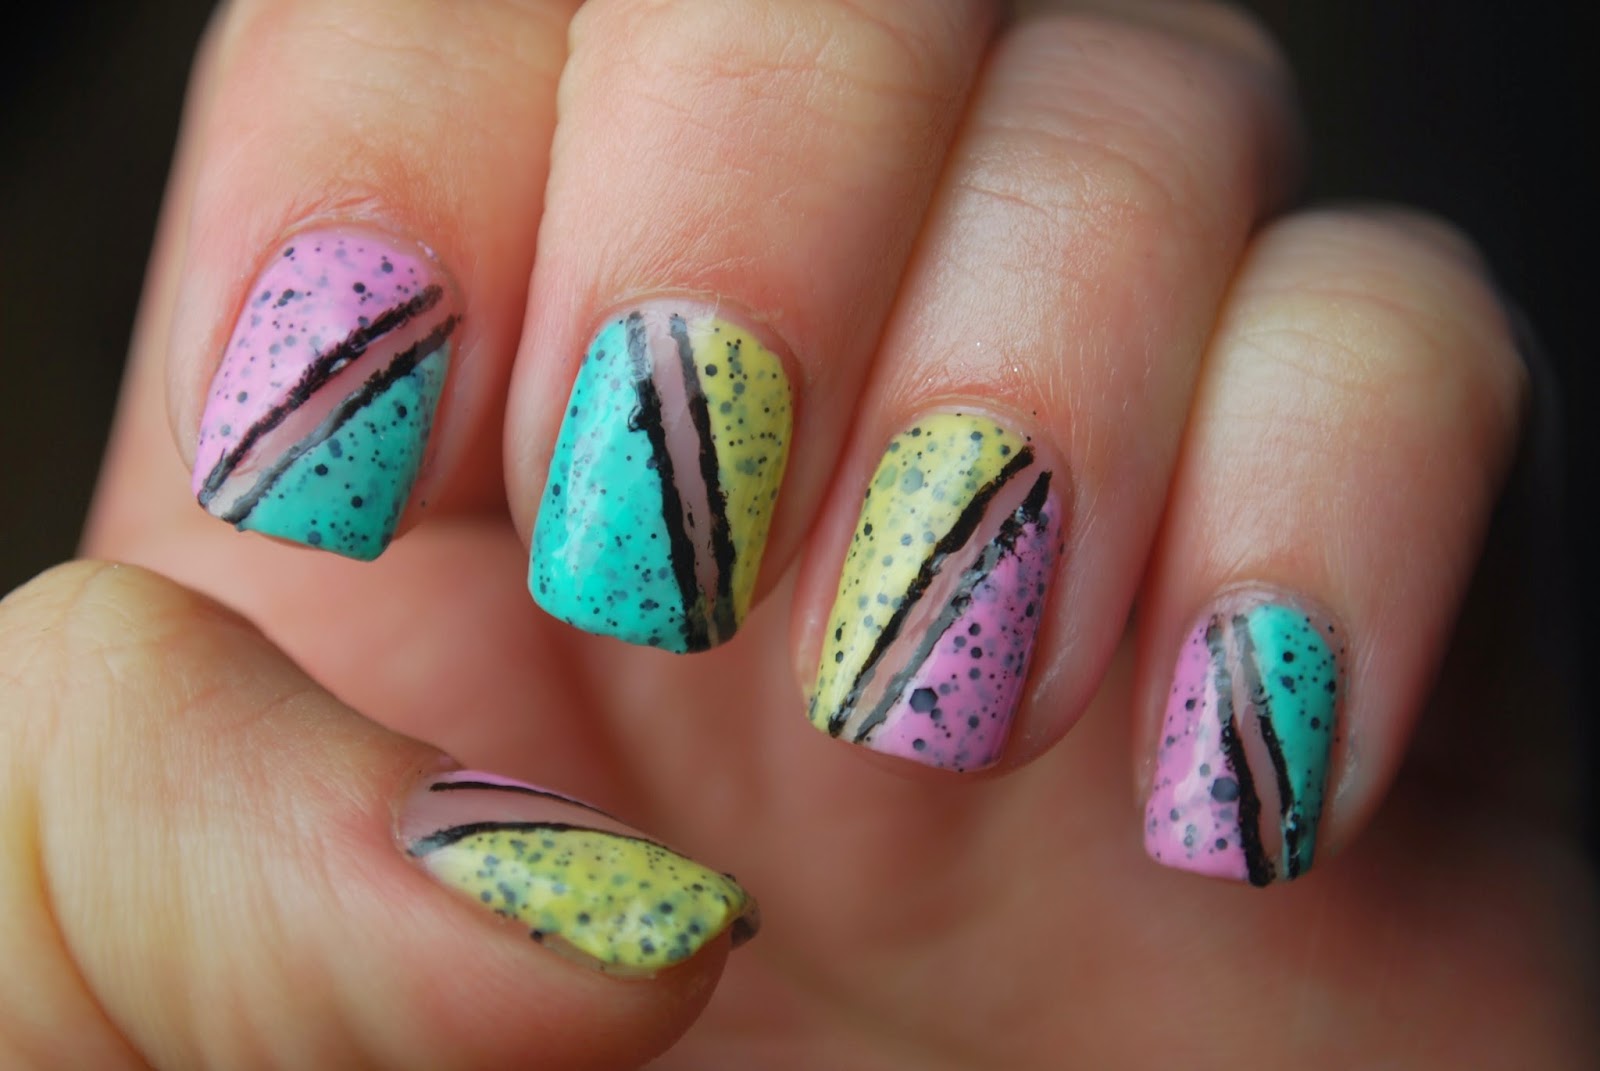 2. How to Create a Speckled Egg Manicure - wide 8